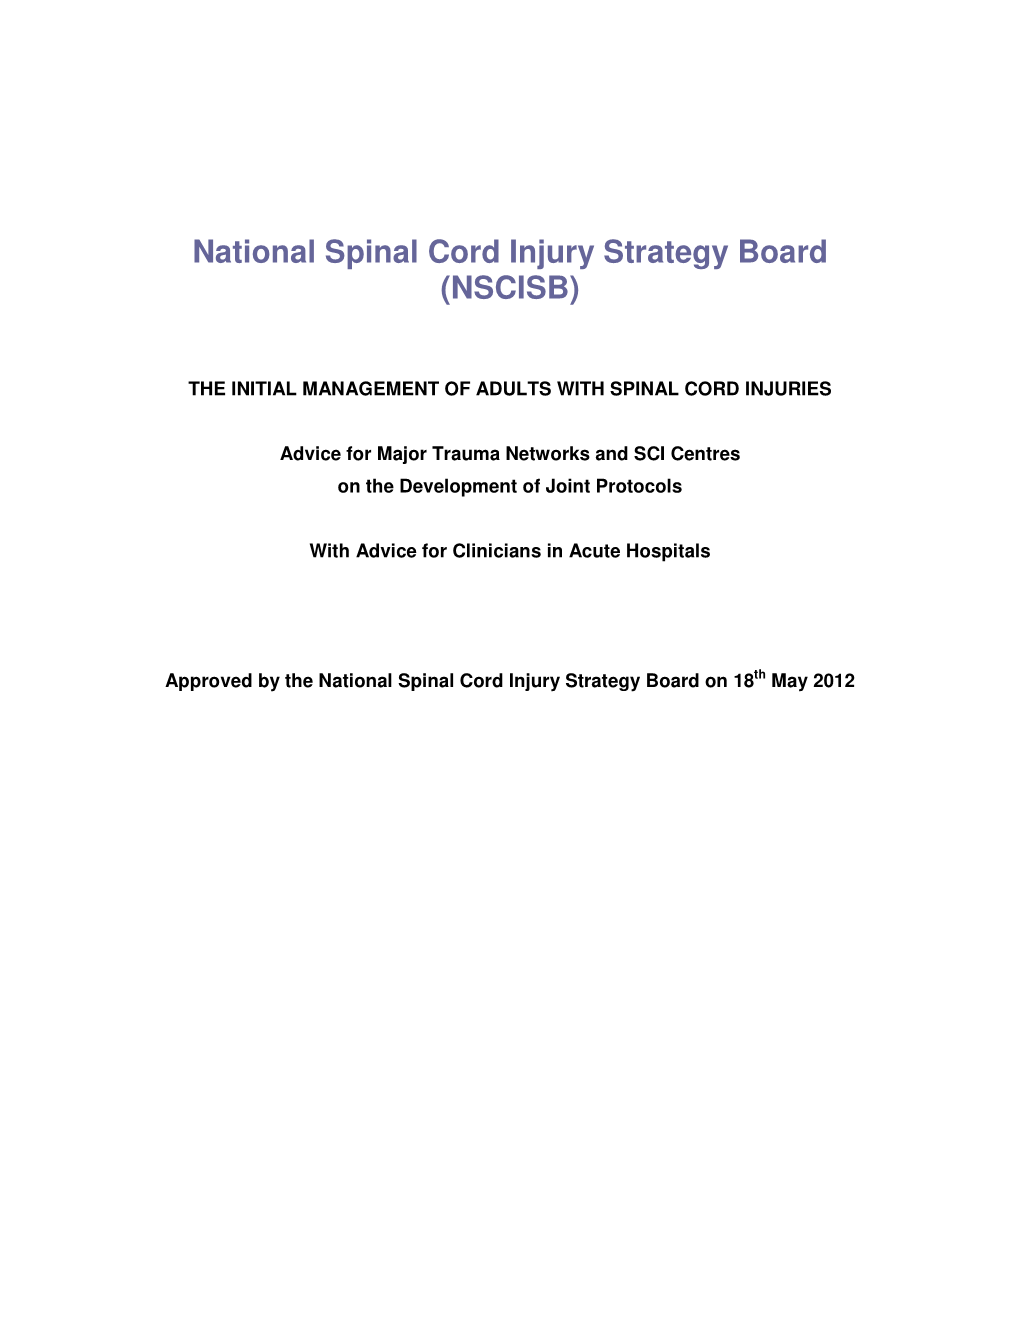 National Spinal Cord Injury Strategy Board (NSCISB), the Initial